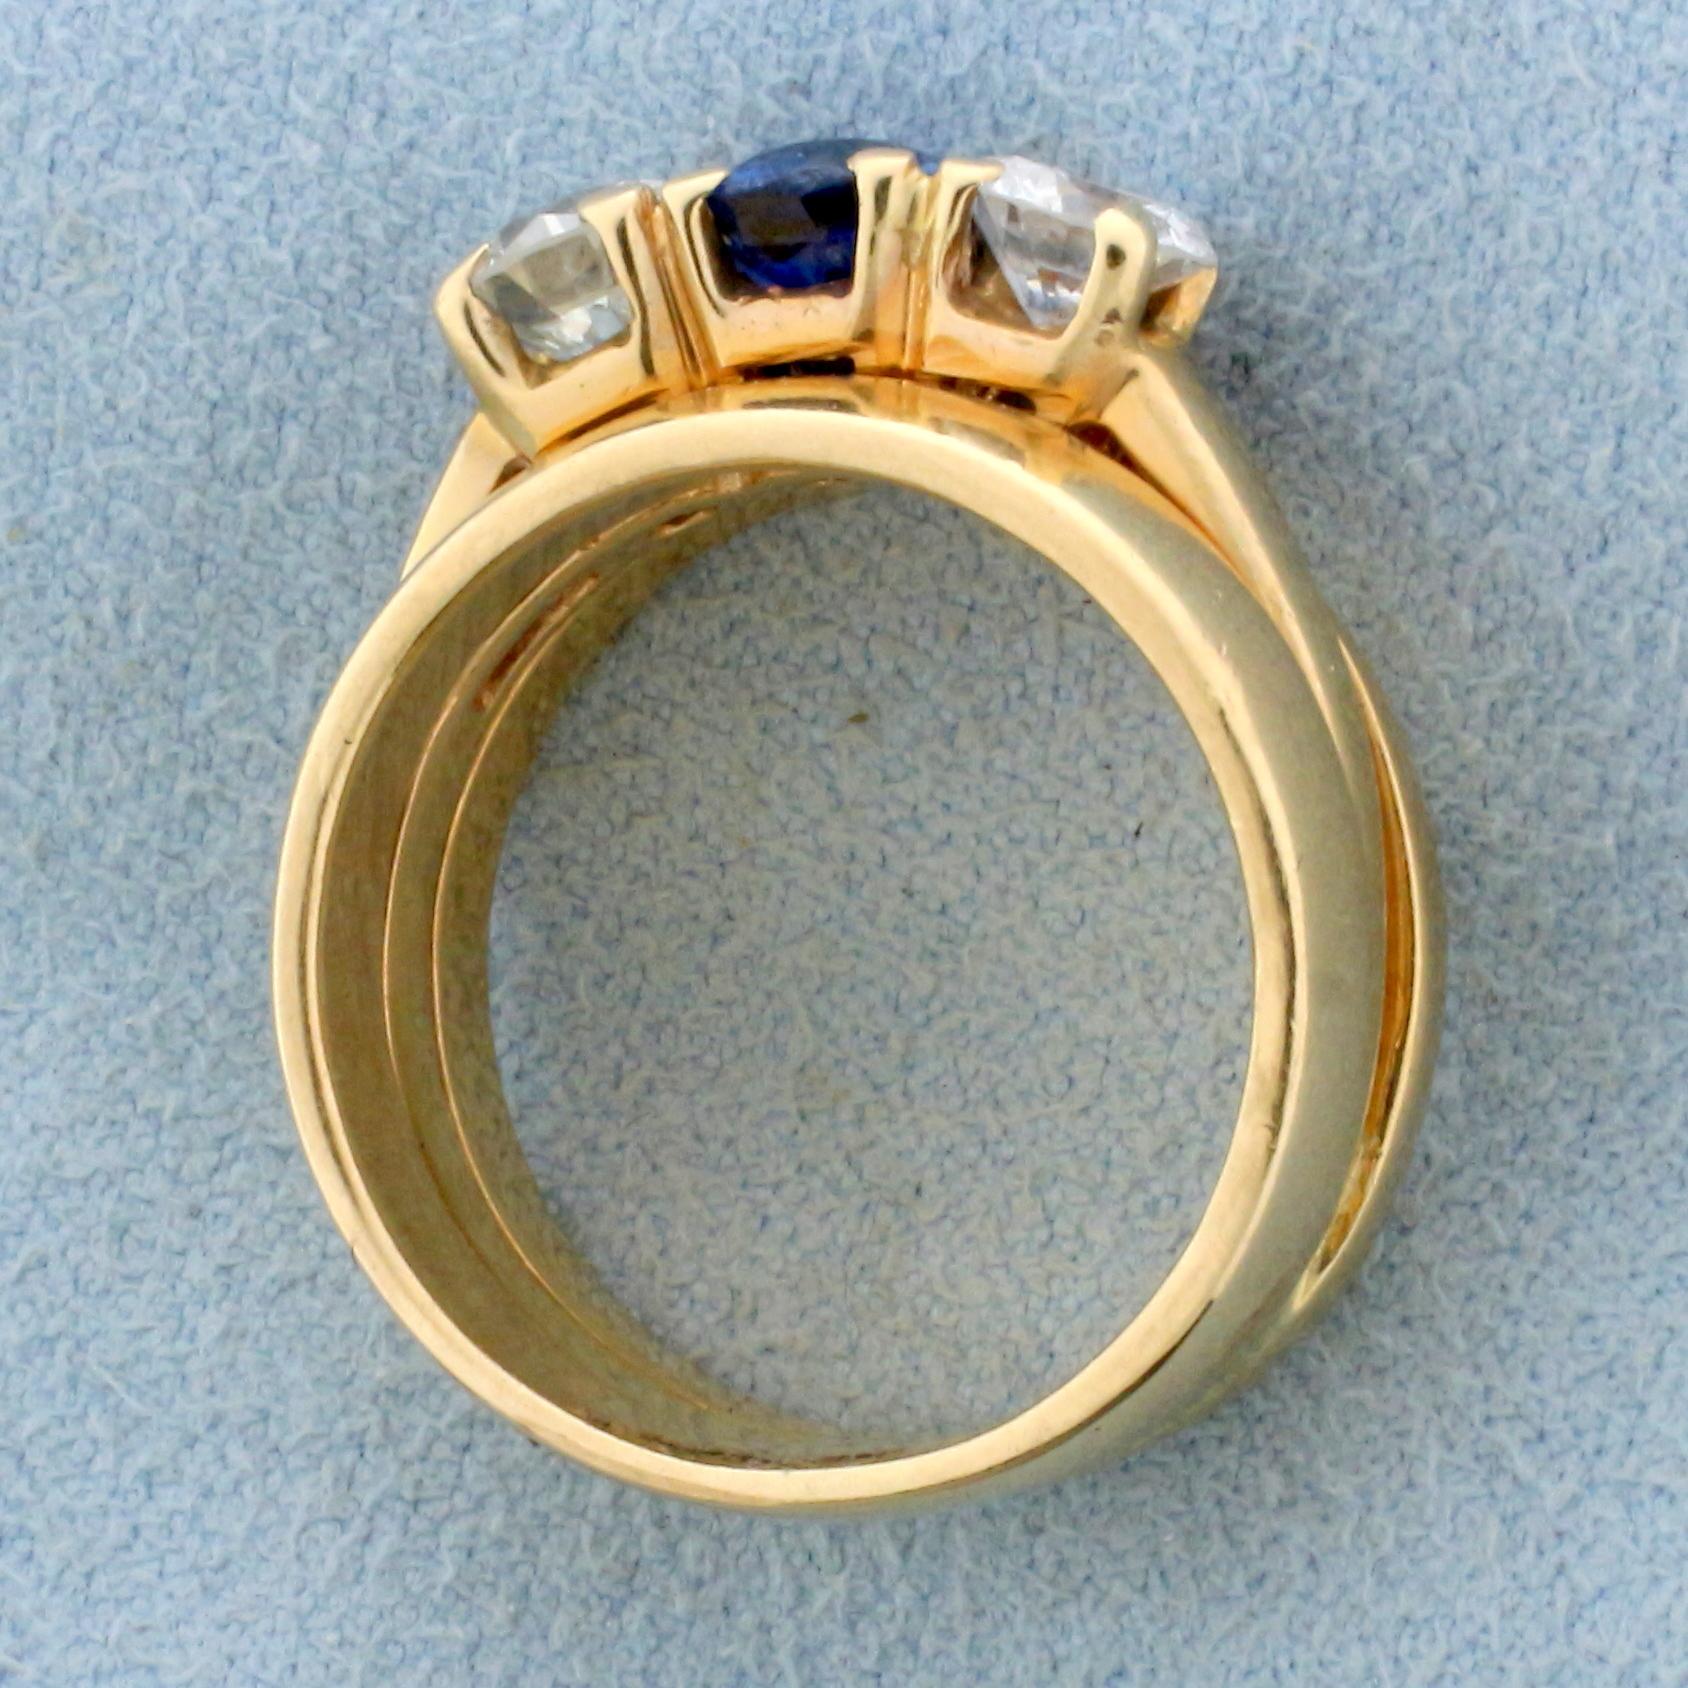 Three Stone Sapphire And Diamond Engagement Or Anniversary Ring In 14k Yellow Gold